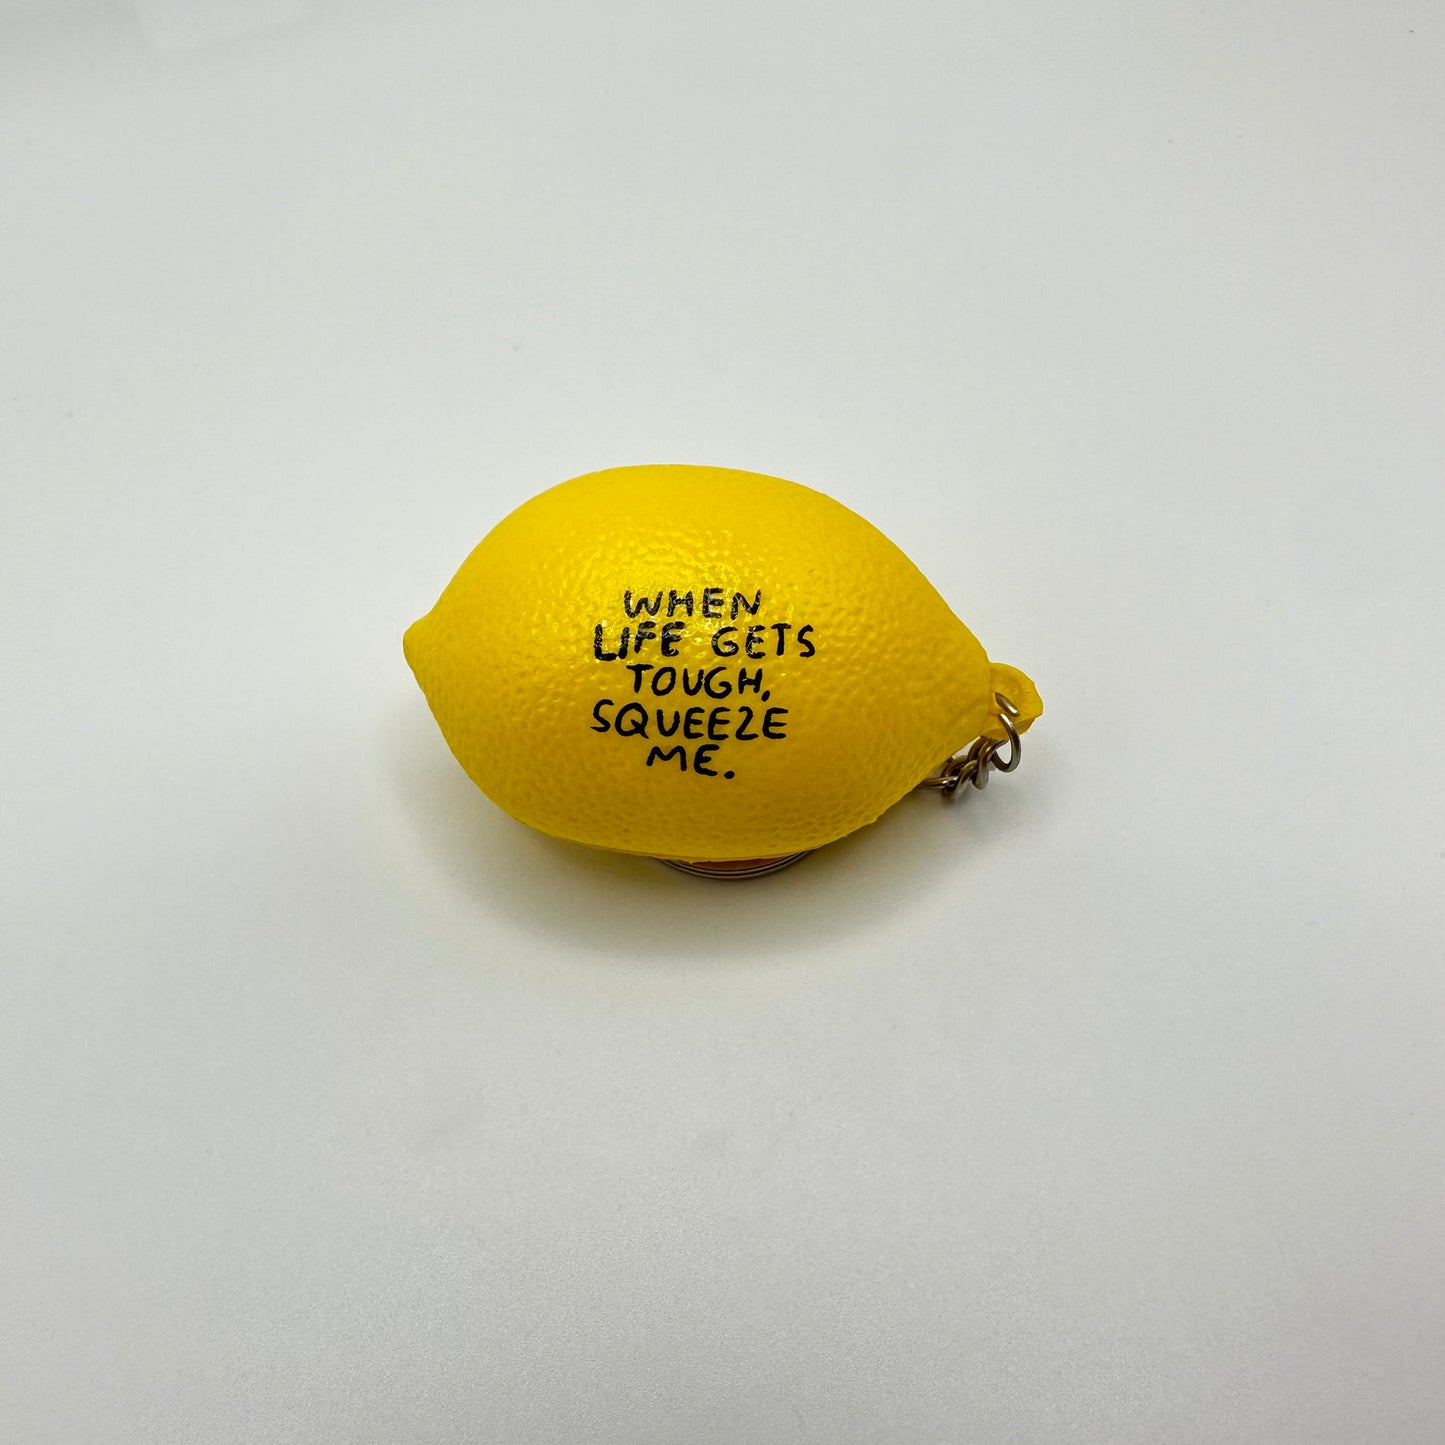 Lemon stress ball keychain that reads: When life gets tough, squeeze me.